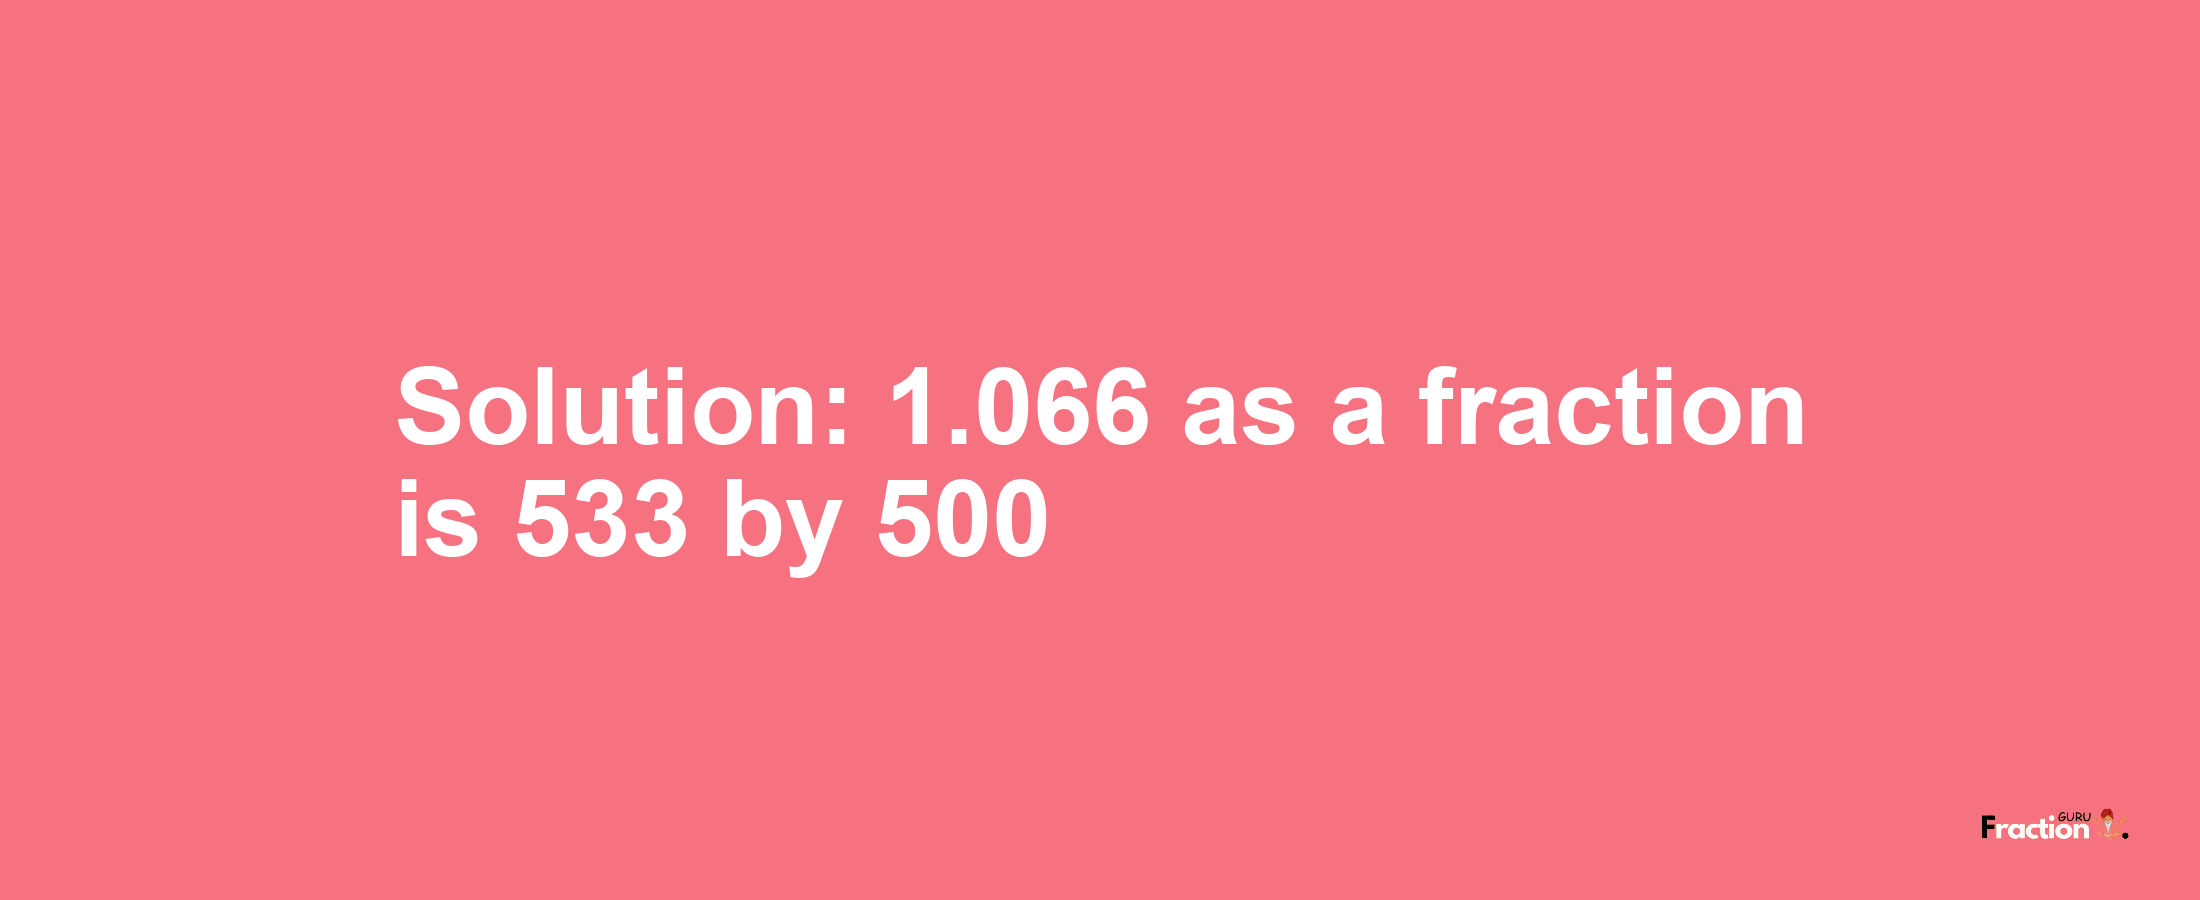 Solution:1.066 as a fraction is 533/500